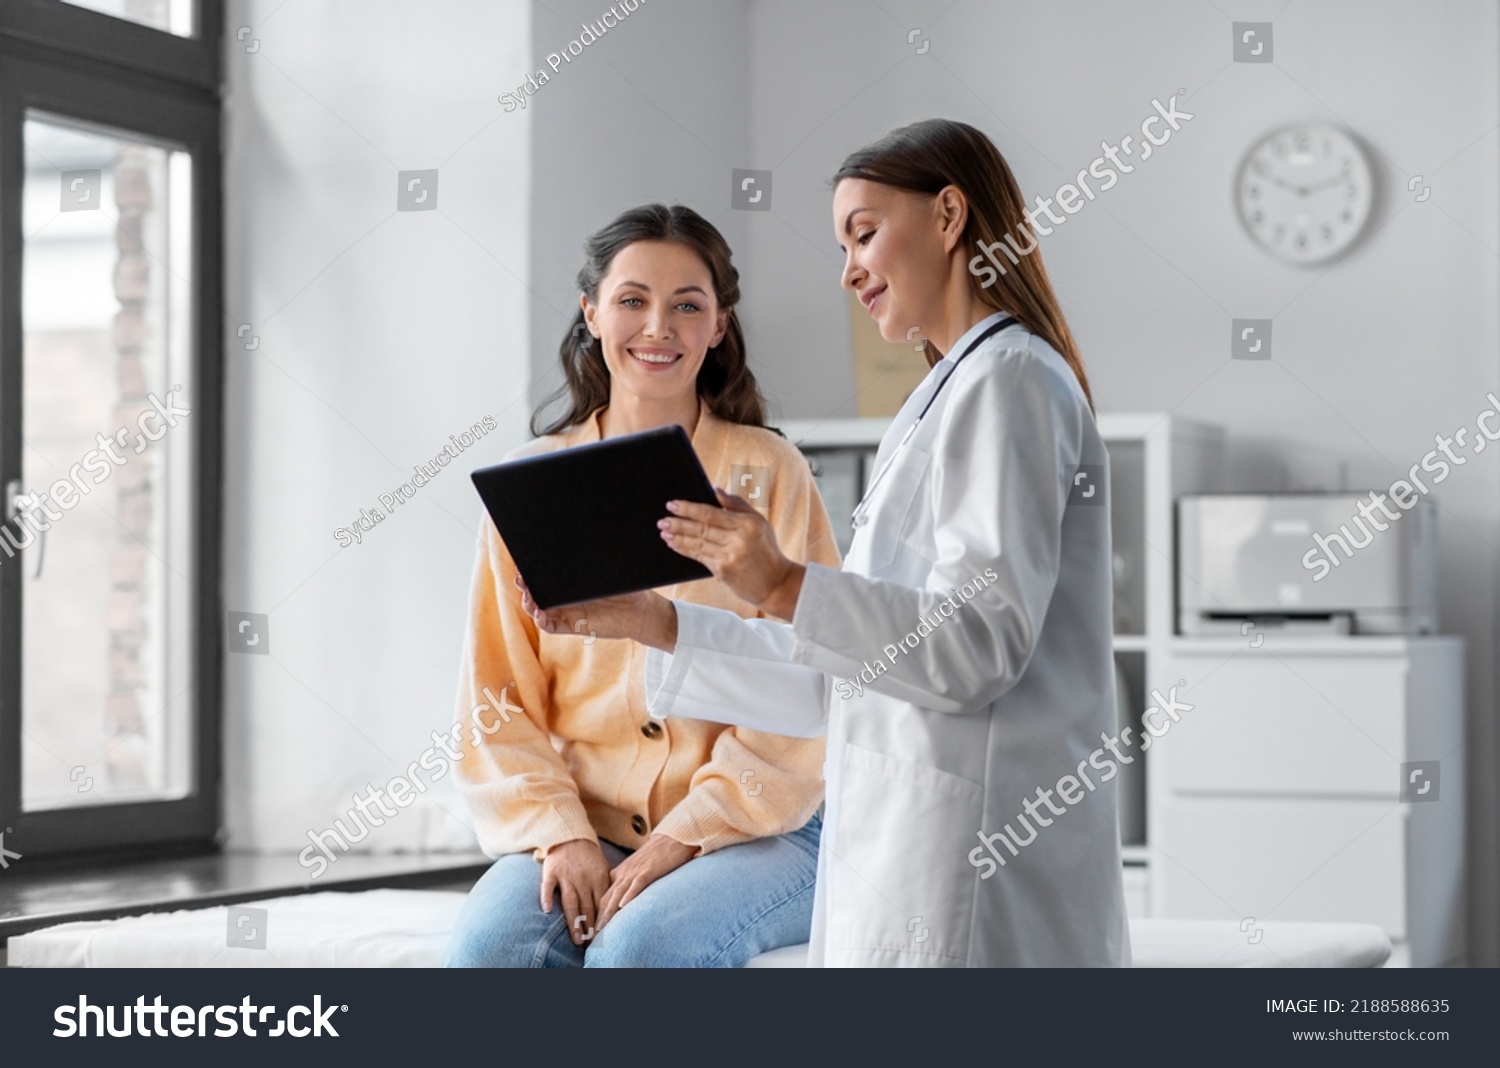 medicine, healthcare and people concept - female doctor with tablet pc computer talking to smiling woman patient at hospital #2188588635